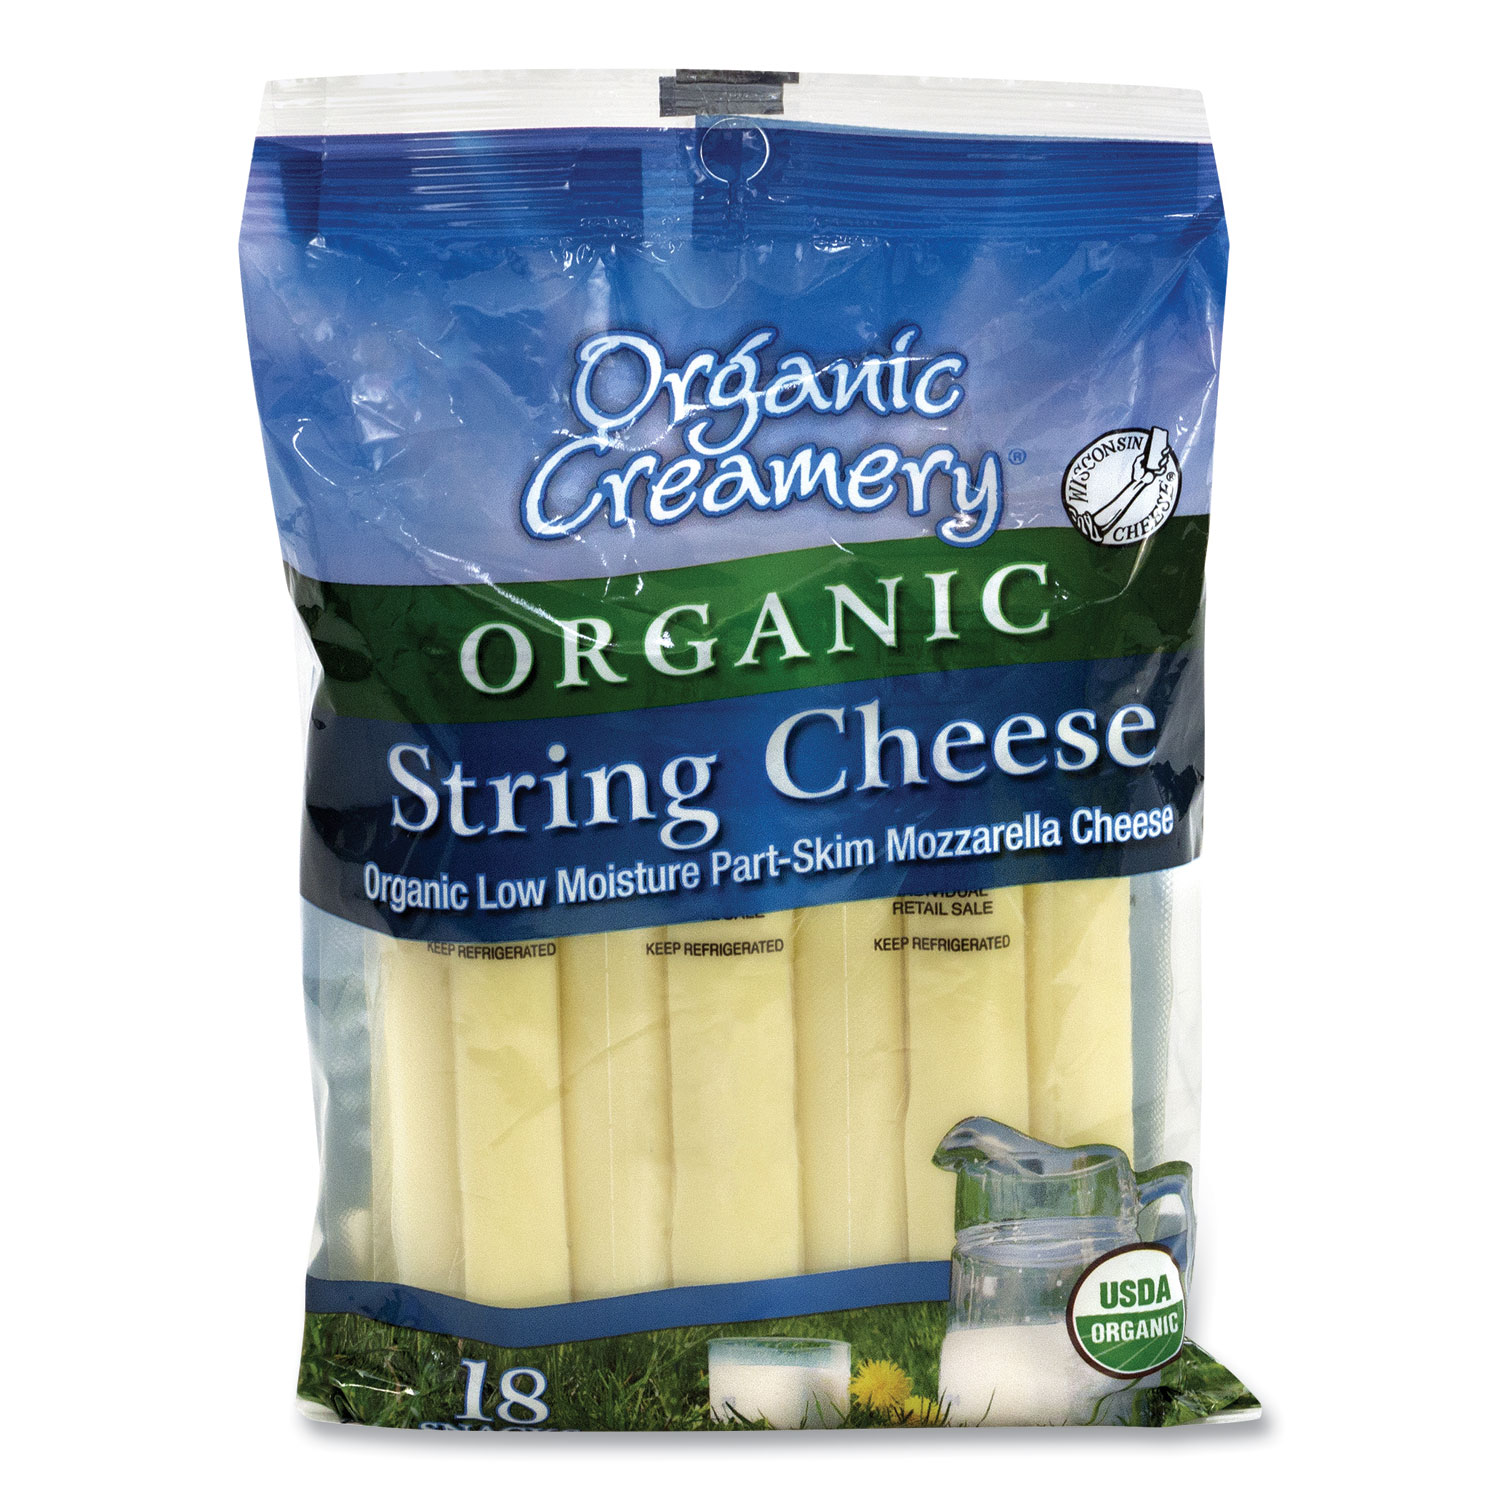  Organic Creamery 12974 Organic String Cheese, Mozzarella, 1 oz, 18/Pack, Free Delivery in 1-4 Business Days (GRR90200074) 